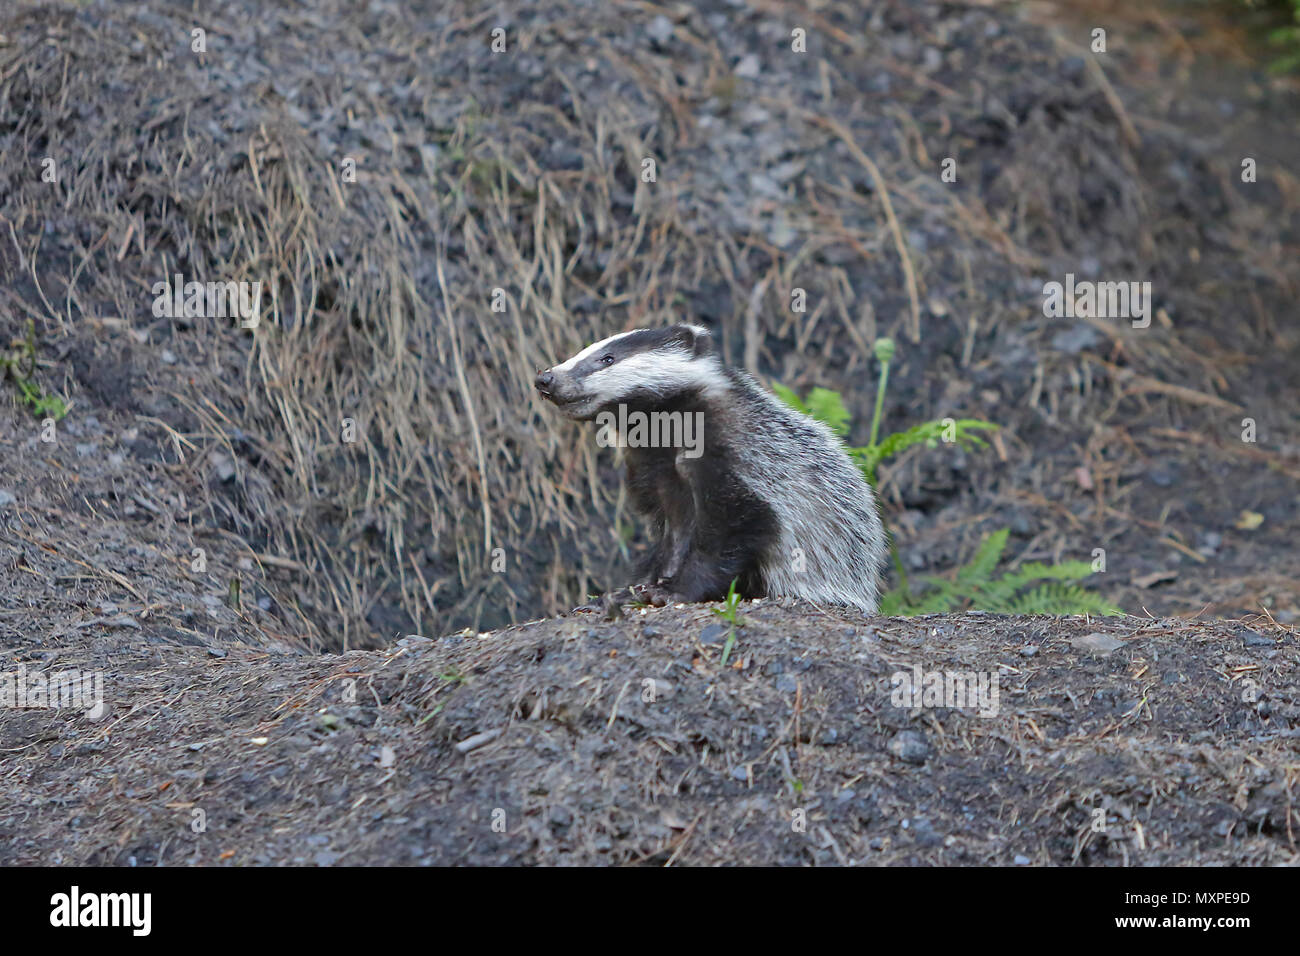 Badger cub near its sett in the Forest of Dean Stock Photo